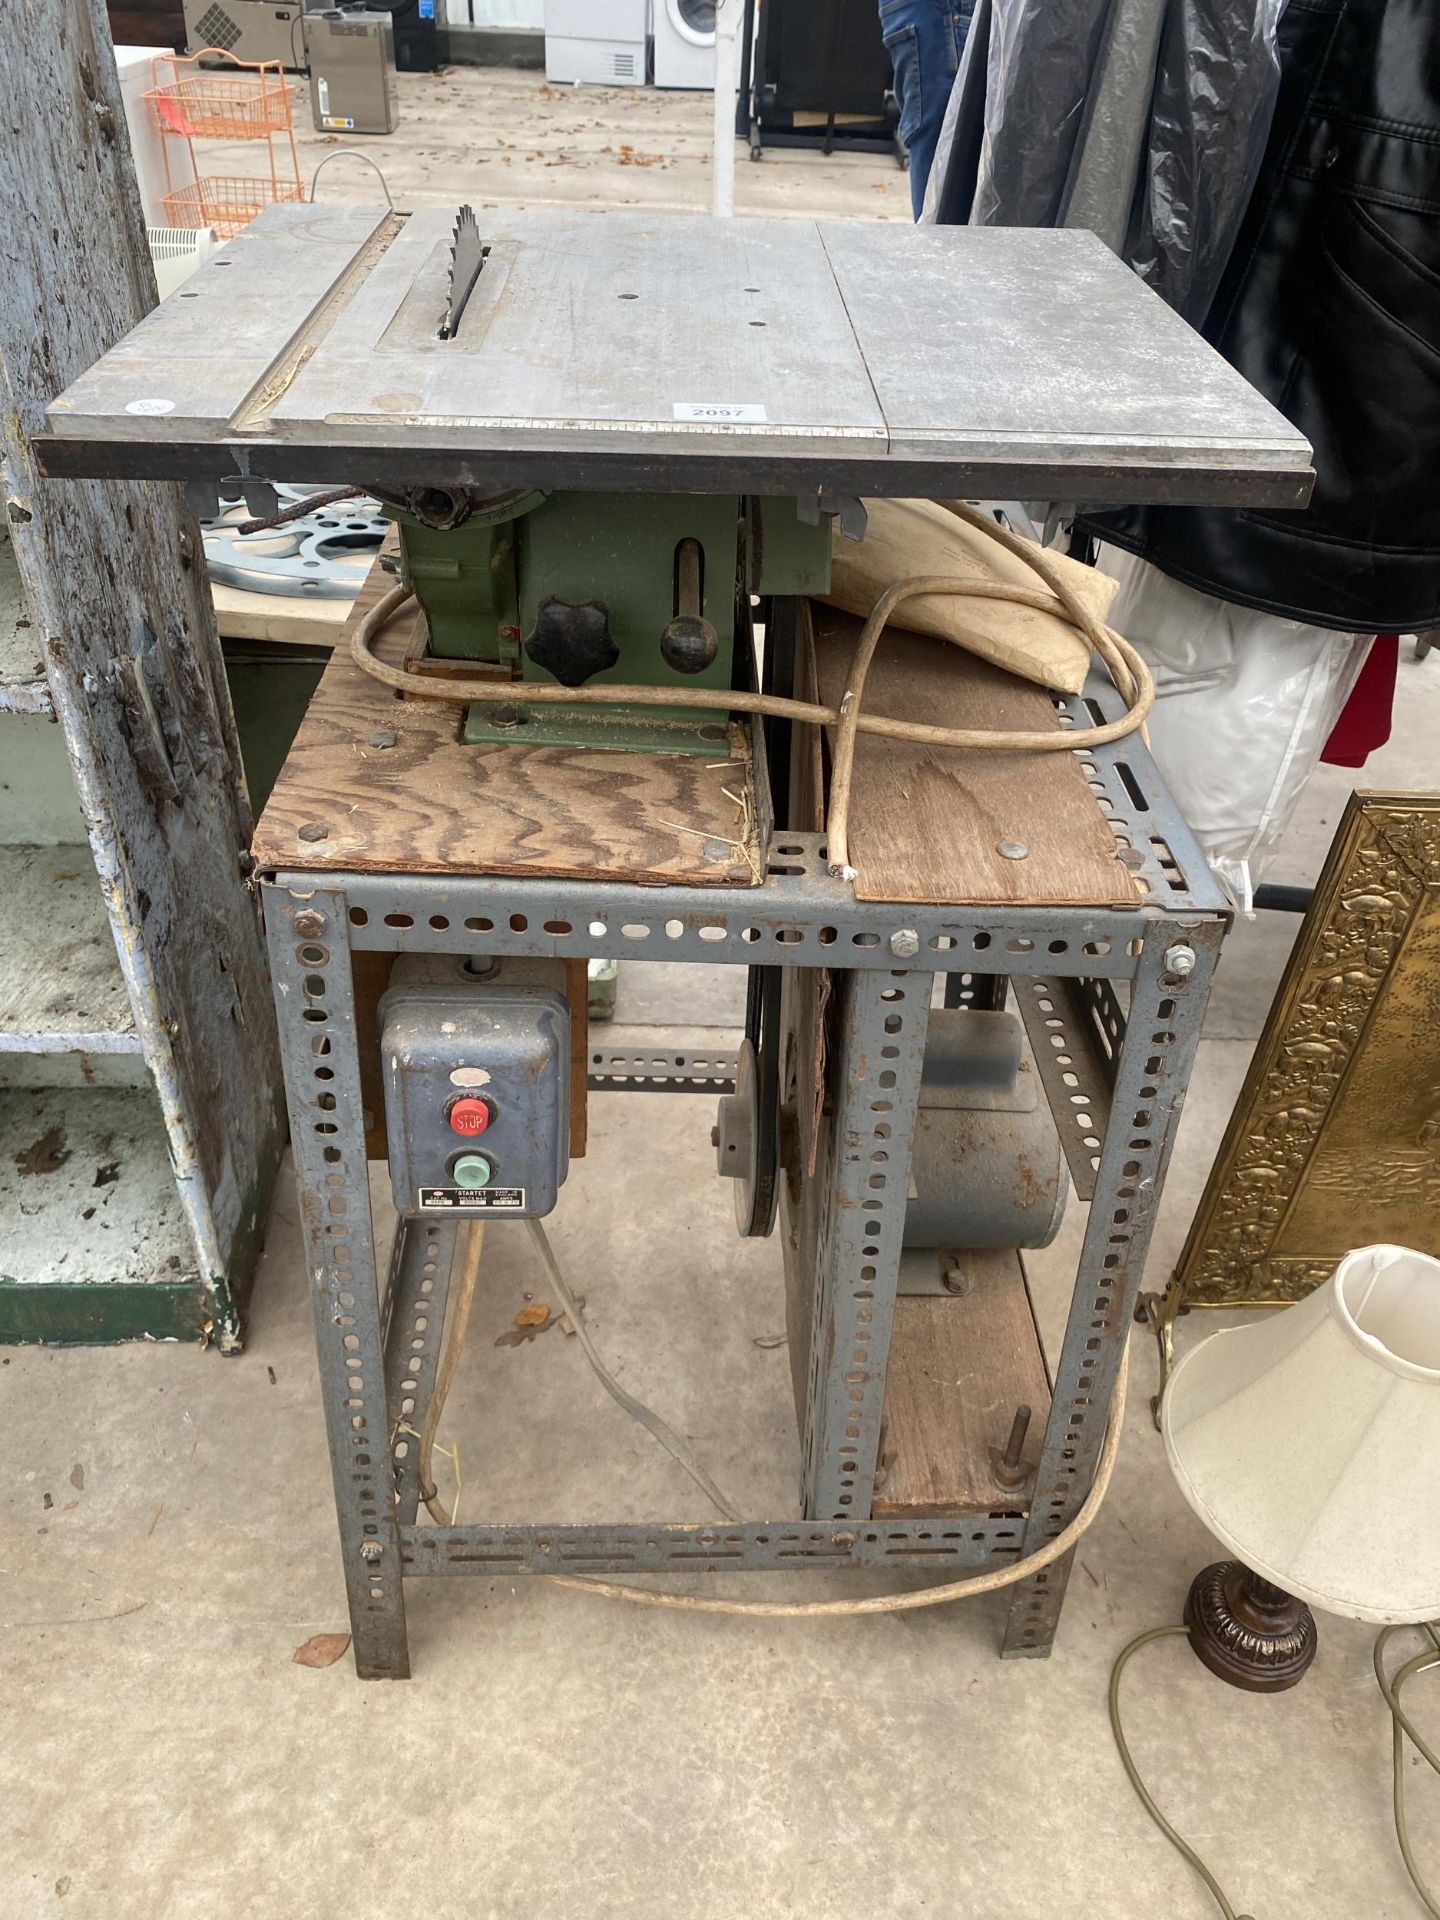 AN ELECTRIC WORKSHOP TABLE SAW